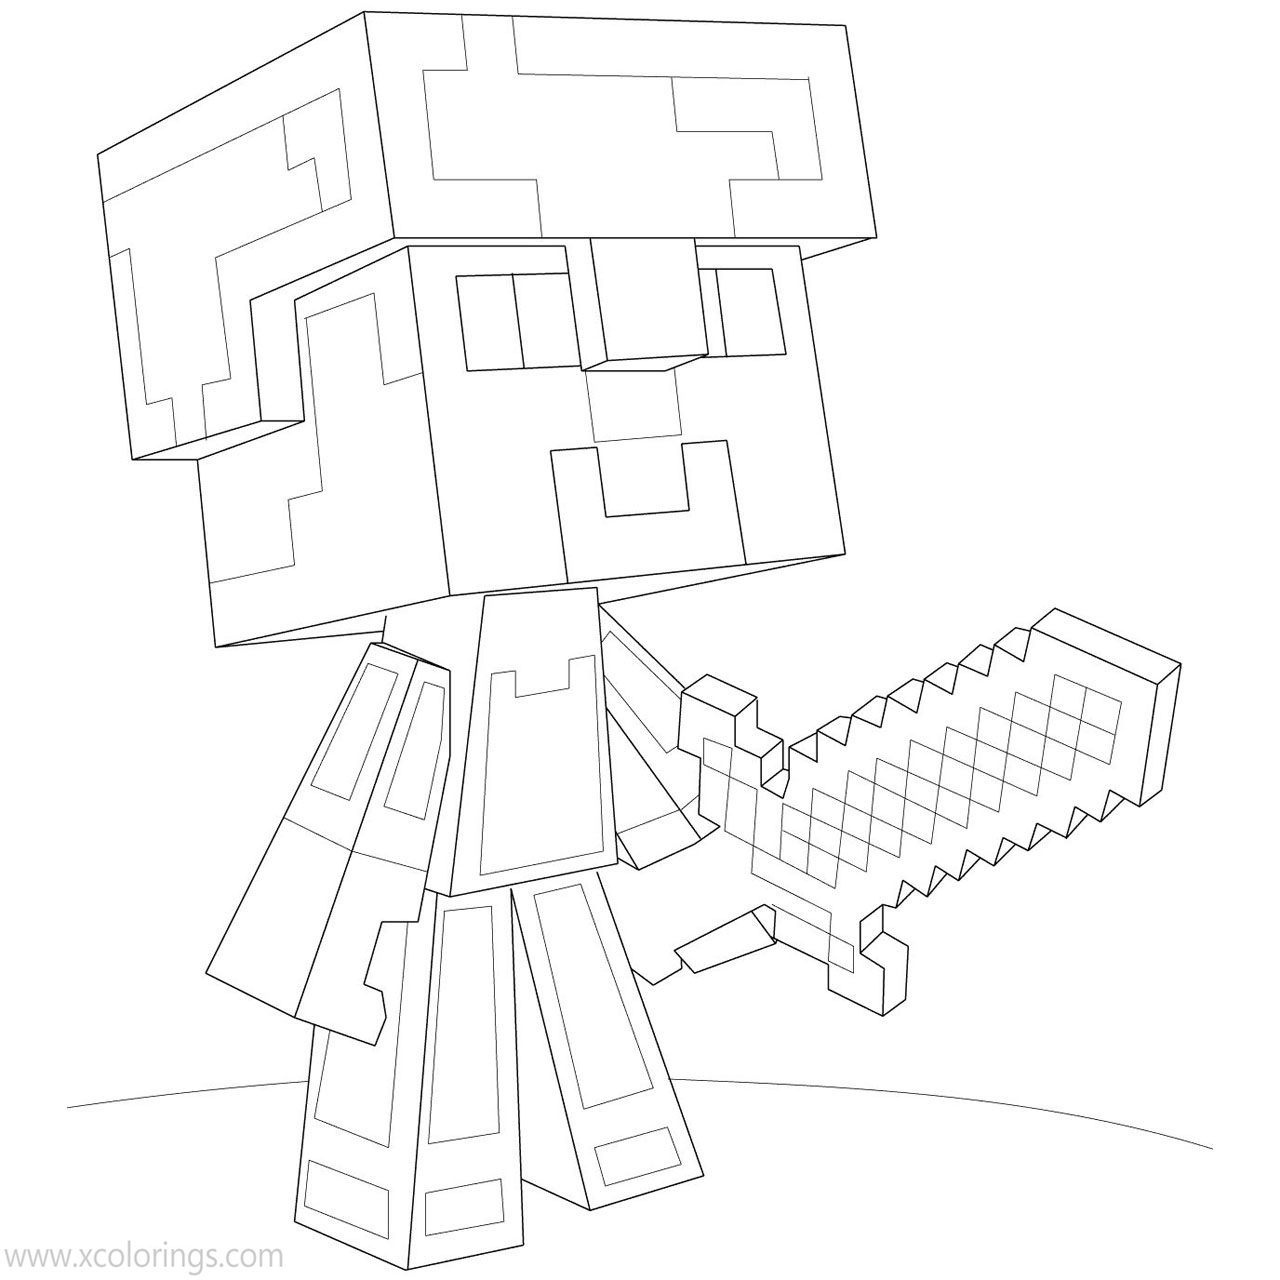  Minecraft  Steve Coloring  Pages  Diamond Armor  XColorings com